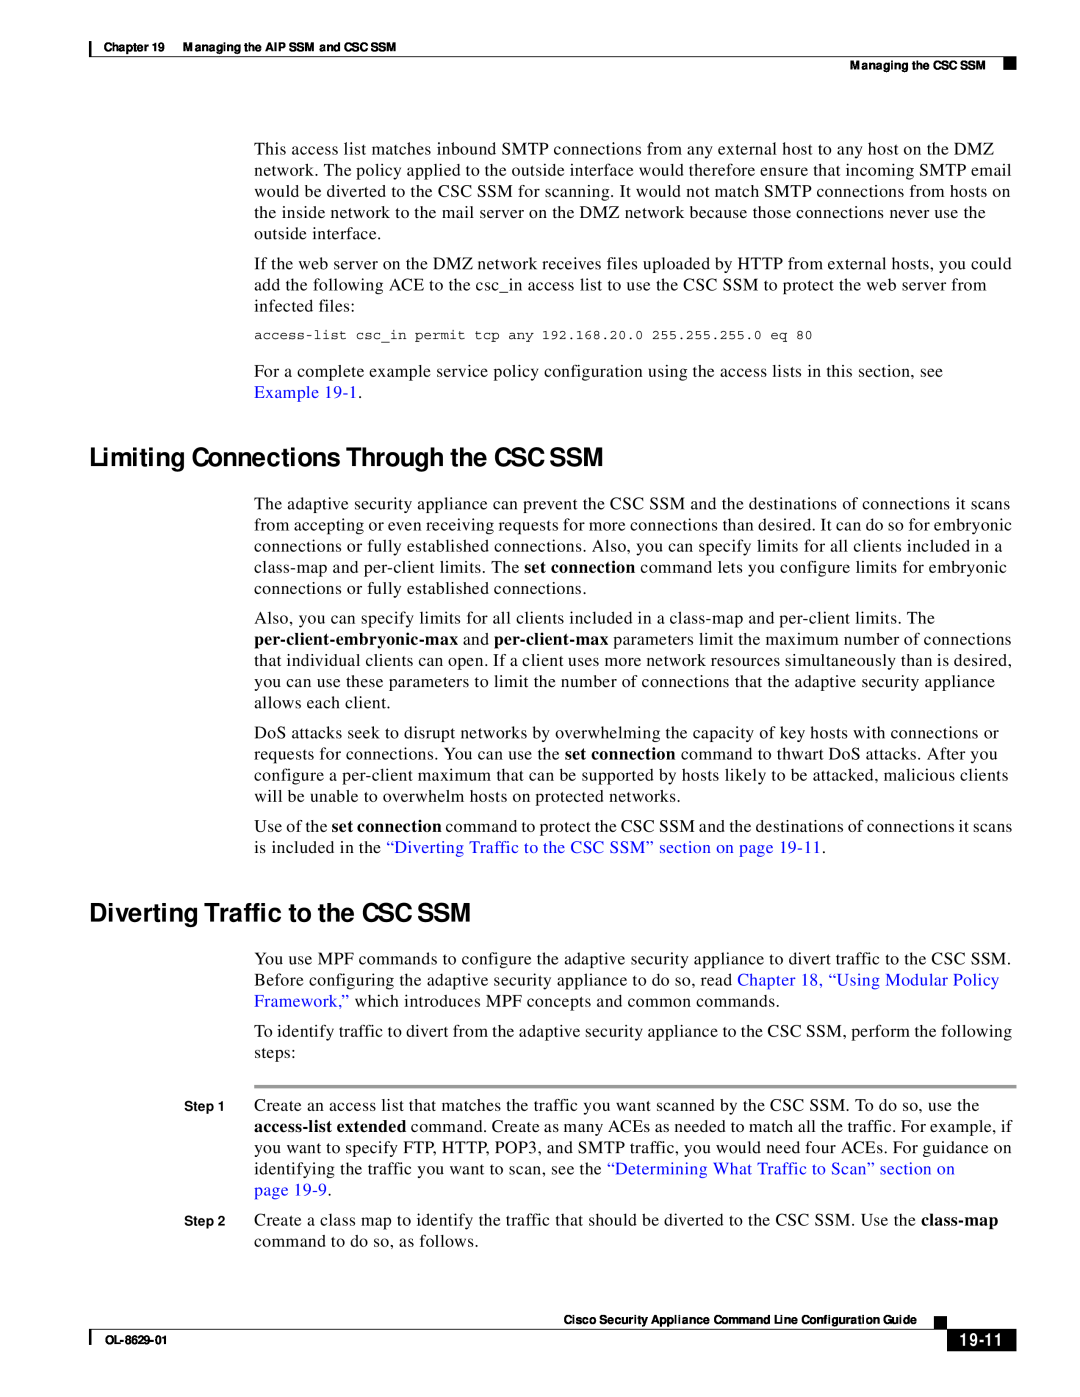 Cisco Systems ASA 5500 Limiting Connections Through the CSC SSM, Diverting Traffic to the CSC SSM, Example, page, 19-11 